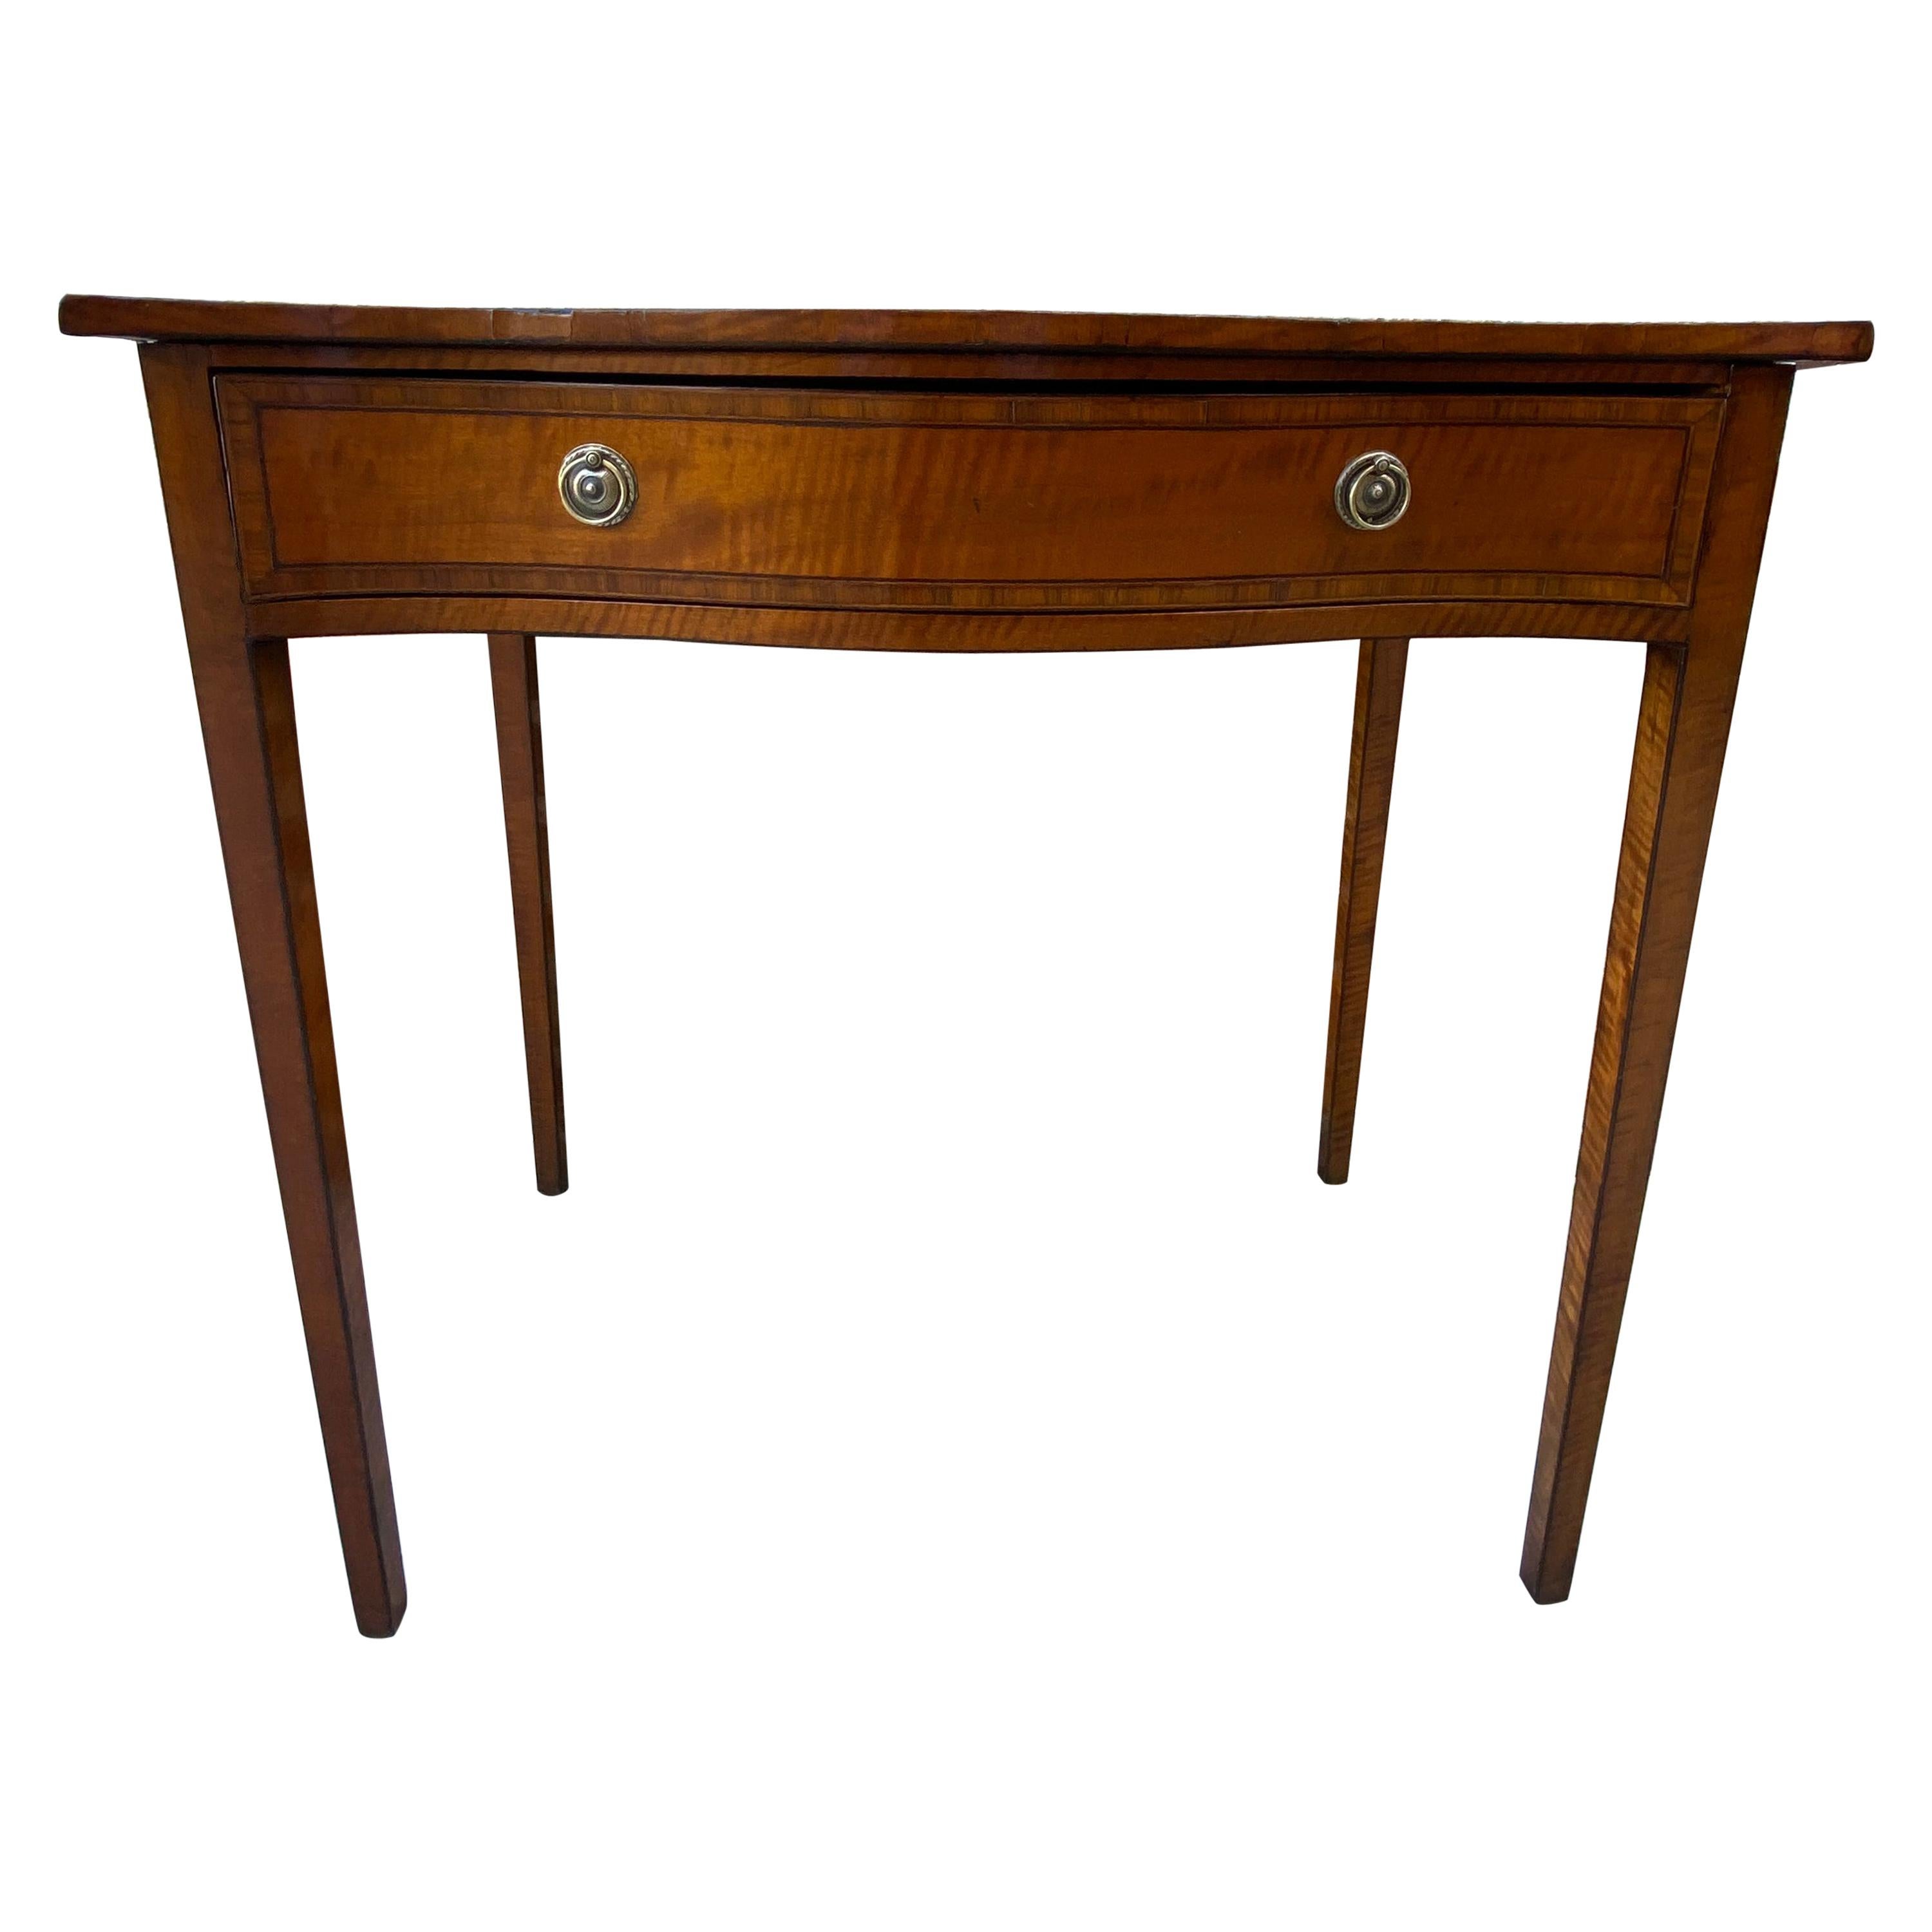 English Satinwood Petite One Drawer Stand c.1790 with String Inlay For Sale